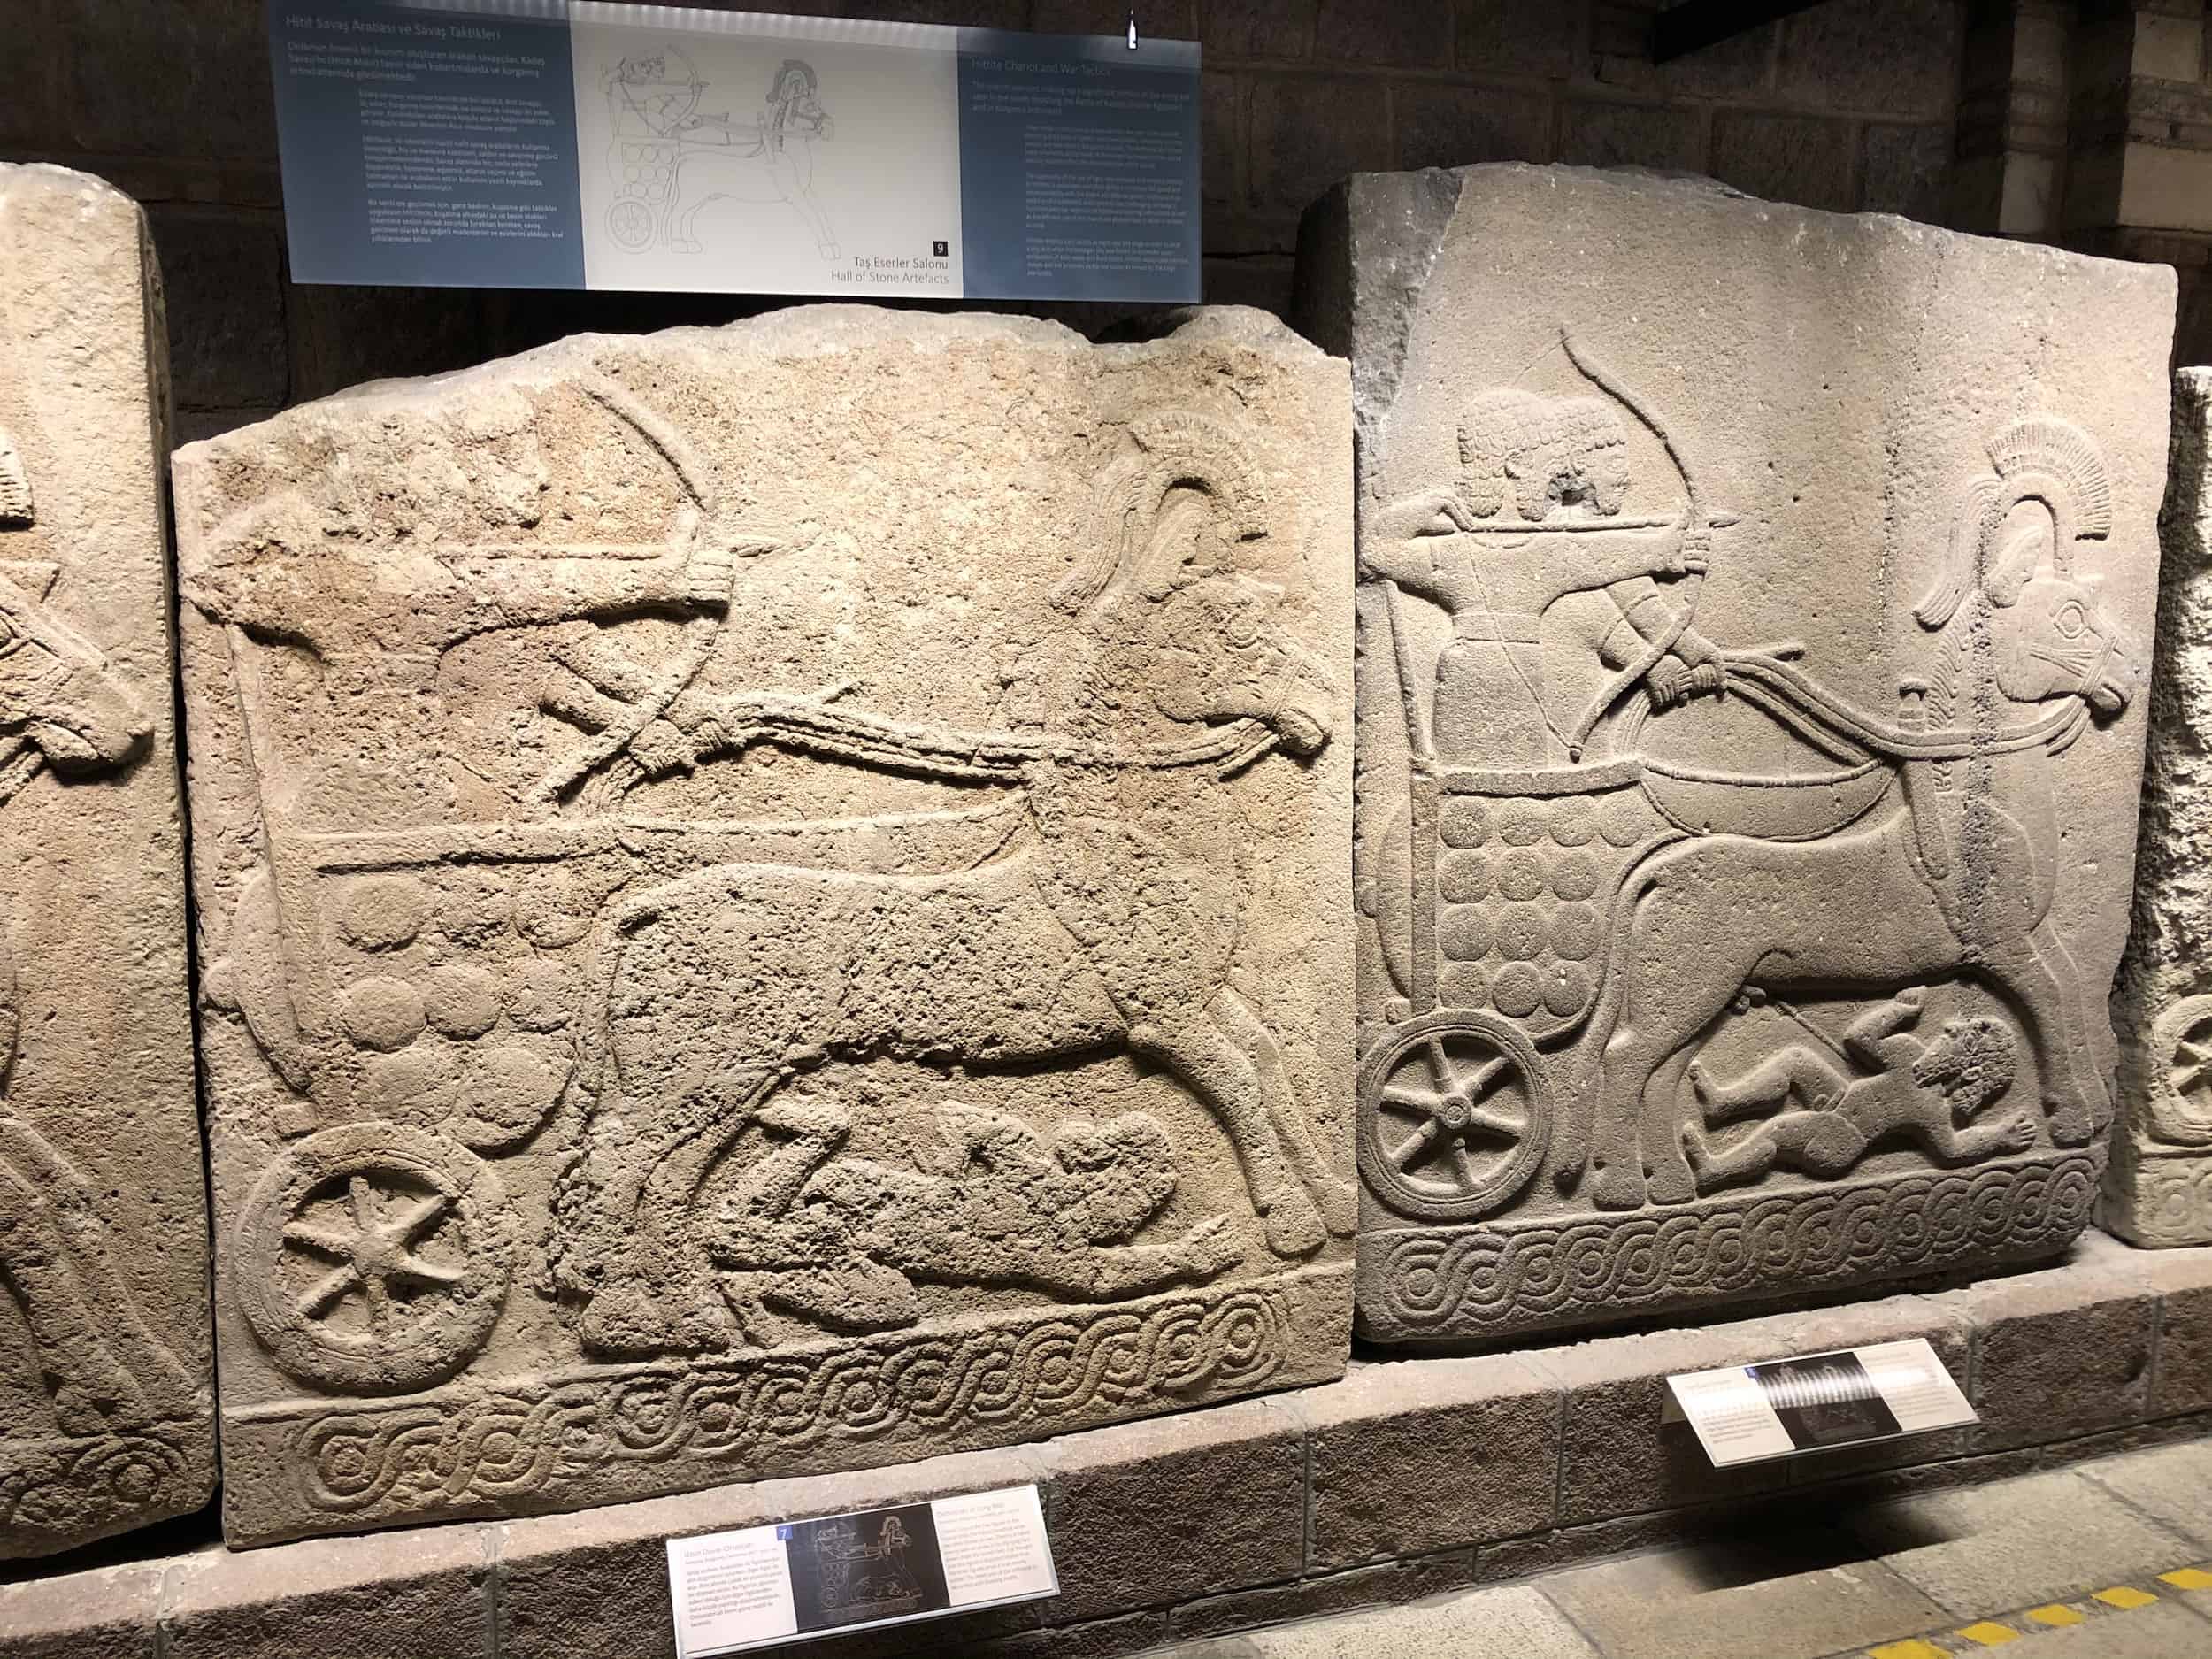 Relief of Hittite chariots and war tactics on the orthostats of the Long Wall (Kargamış) at the Museum of Anatolian Civilizations in Ankara, Turkey